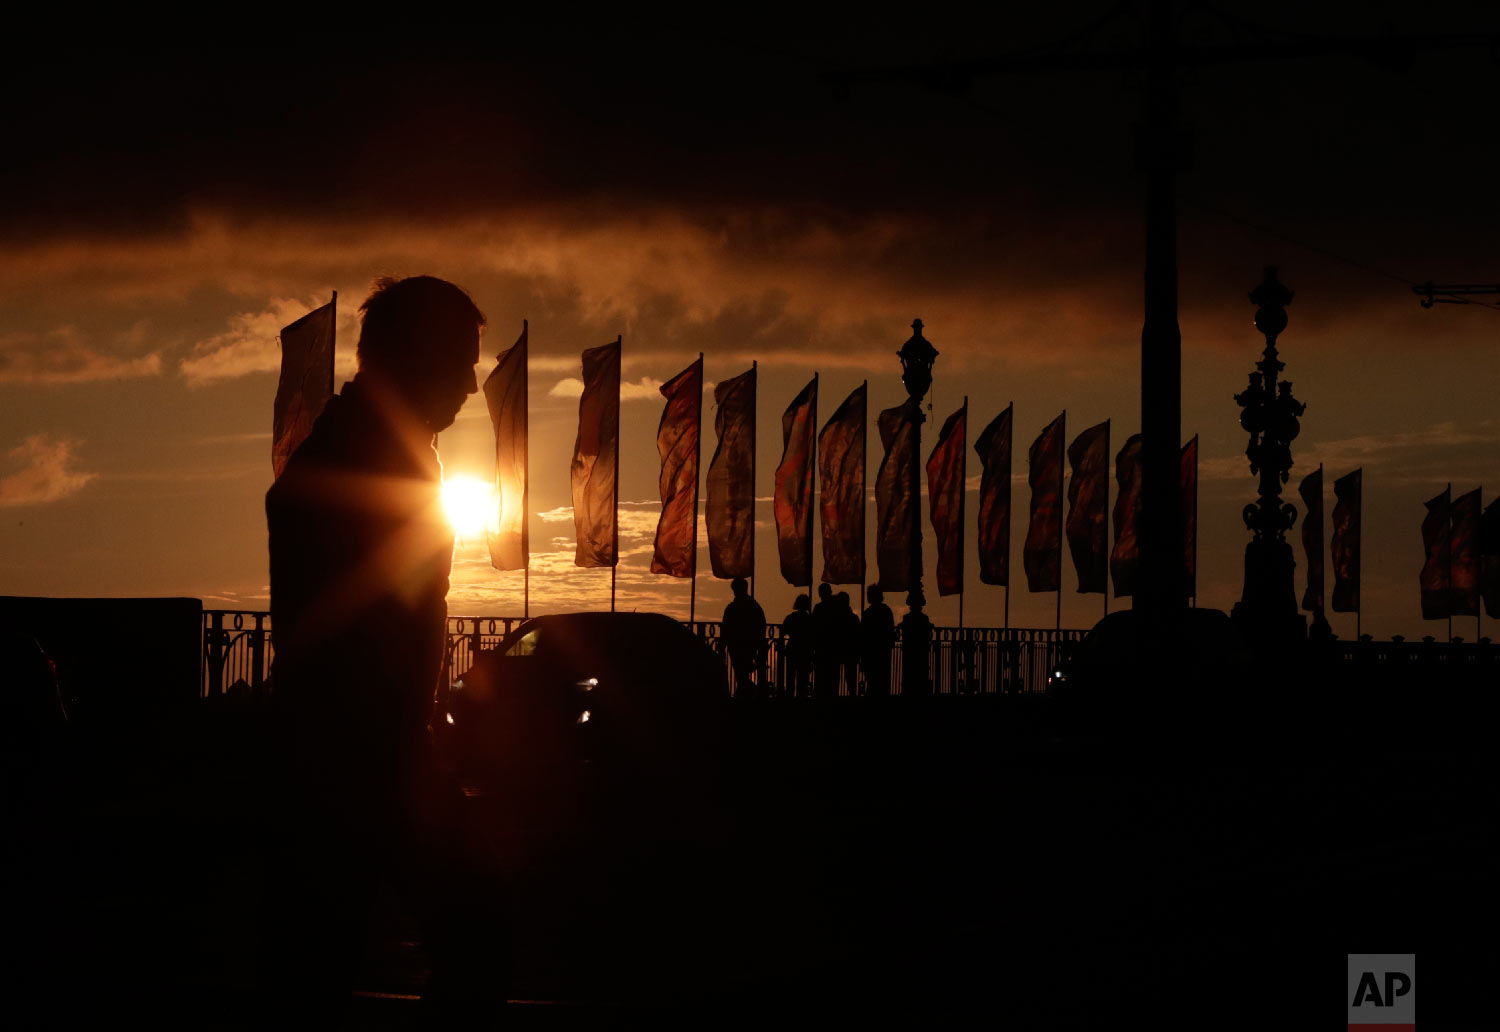  Visitors and banners for the 2018 soccer World Cup are silhouetted in St. Petersburg, Russia on June 24, 2018. (AP Photo/Lee Jin-man) 